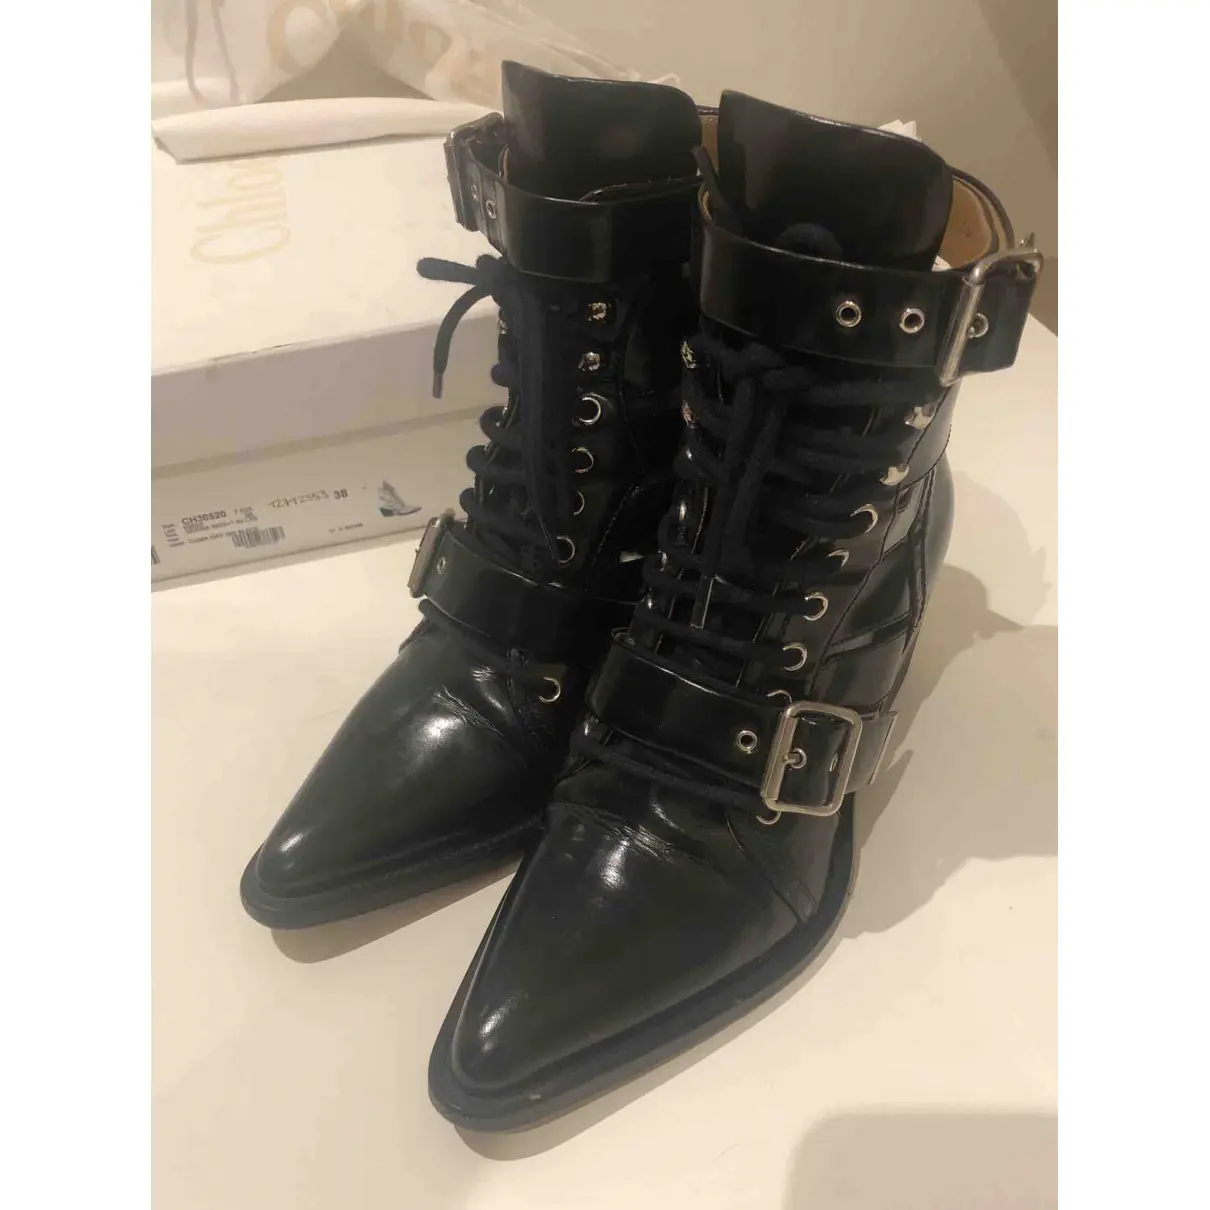 Buy Chloé Rylee leather lace up boots online